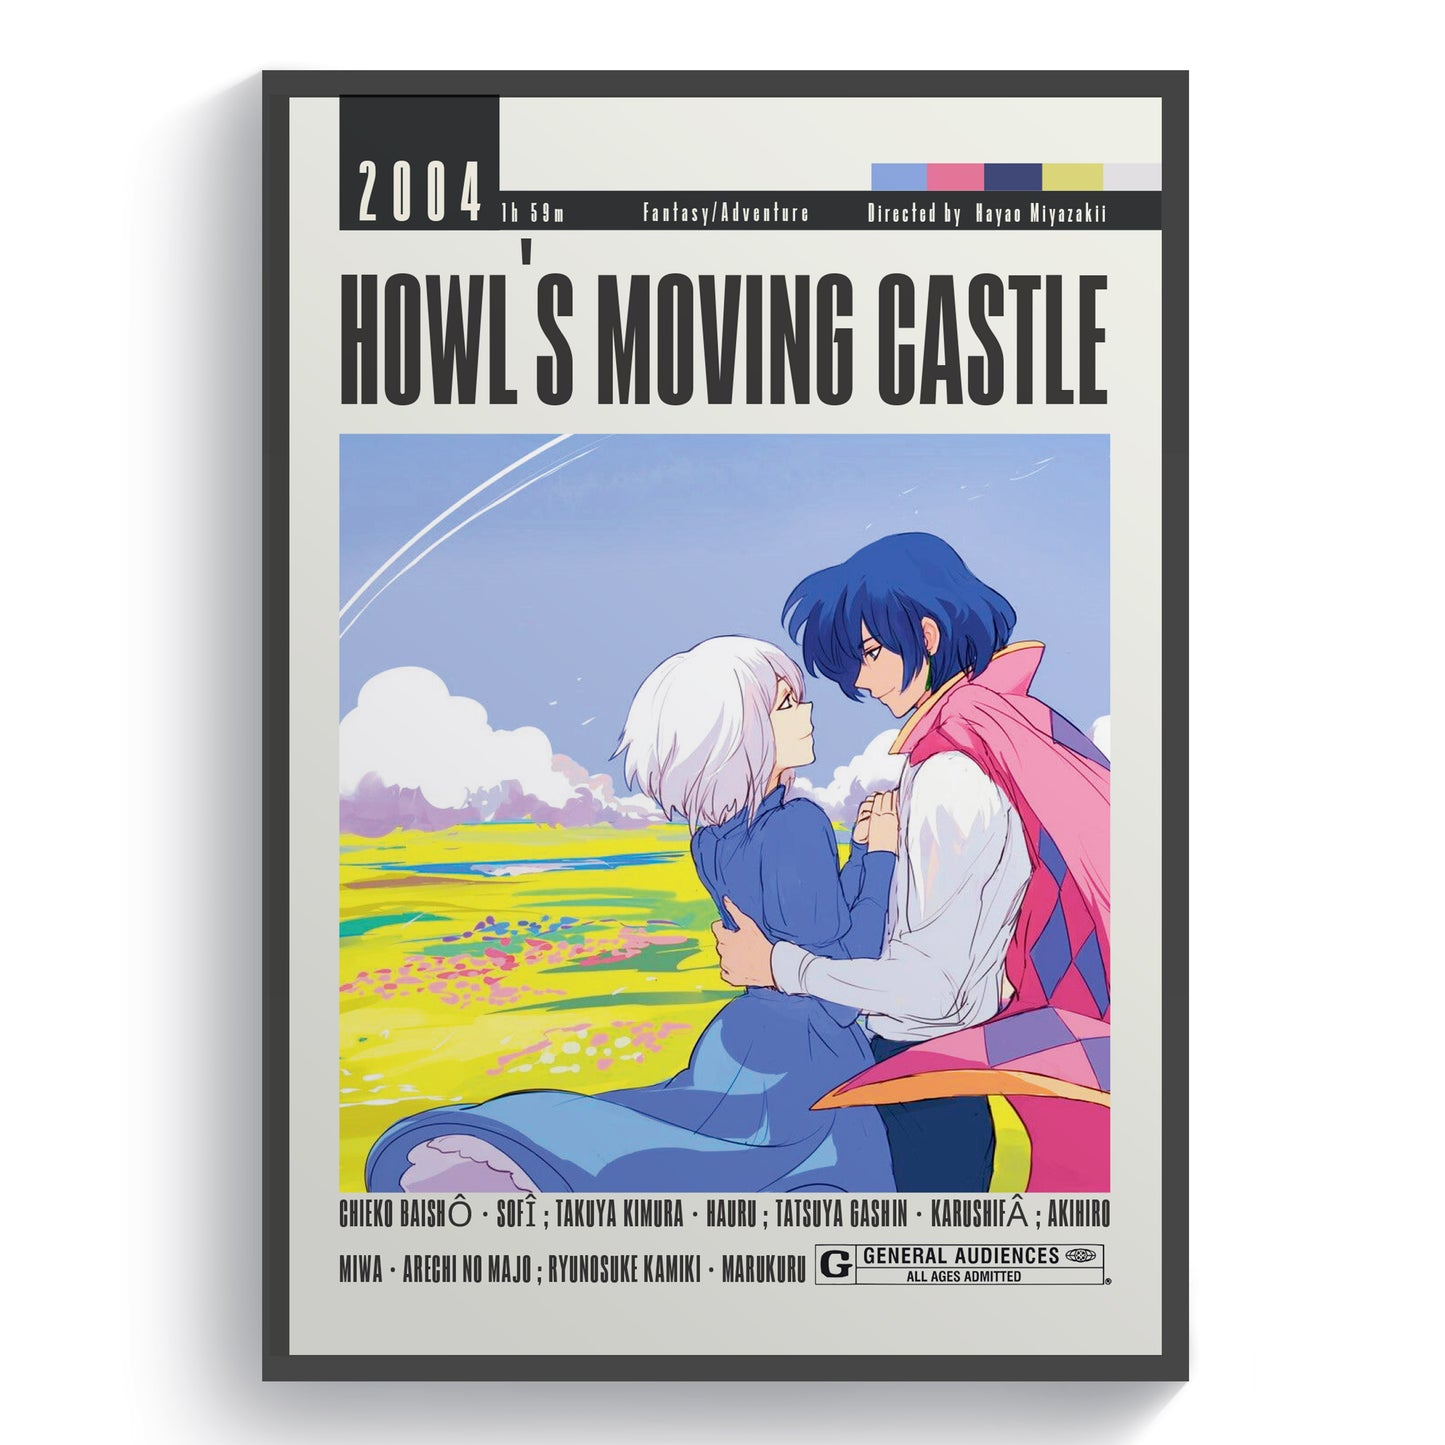 Experience the wonder and magic of Studio Ghibli's Howl's Moving Castle with these classic anime film posters. Featuring stunning artwork from the beloved movie, these posters are perfect for fans of the film and animation enthusiasts alike. Bring the enchanting world of Howl and Sophie into your home with these timeless posters.